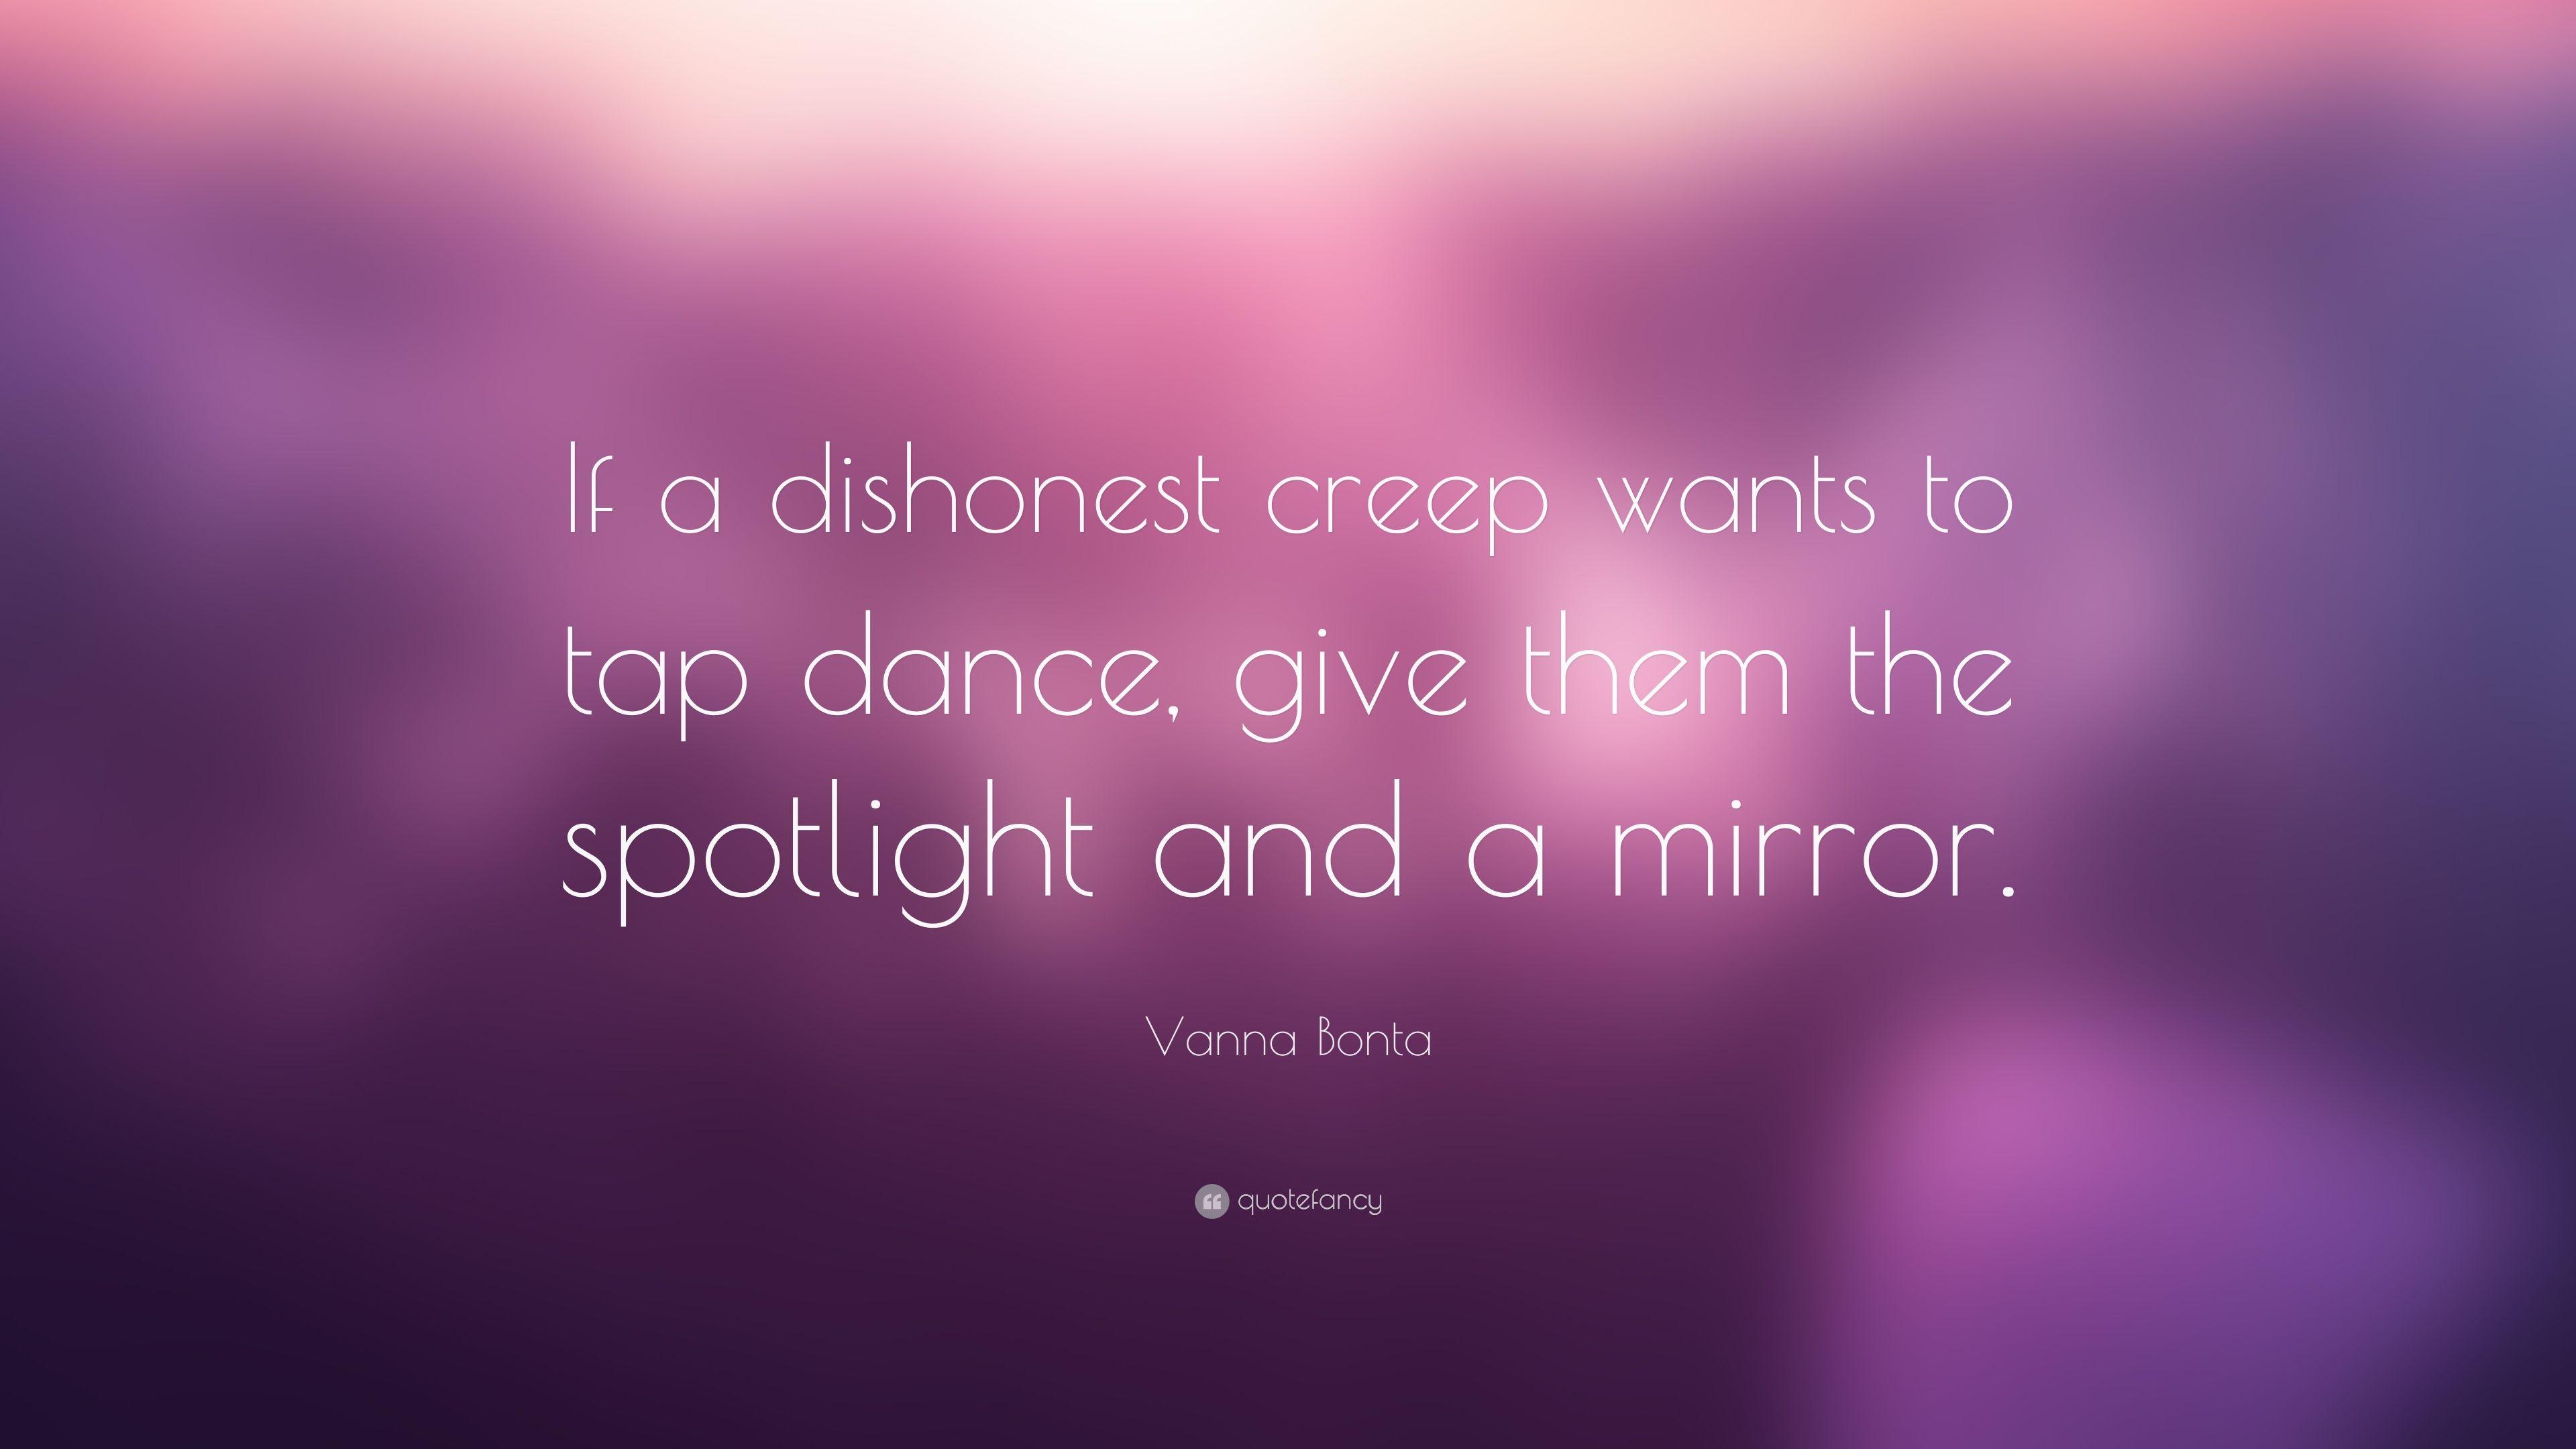 Vanna Bonta Quote: “If a dishonest creep wants to tap dance, give